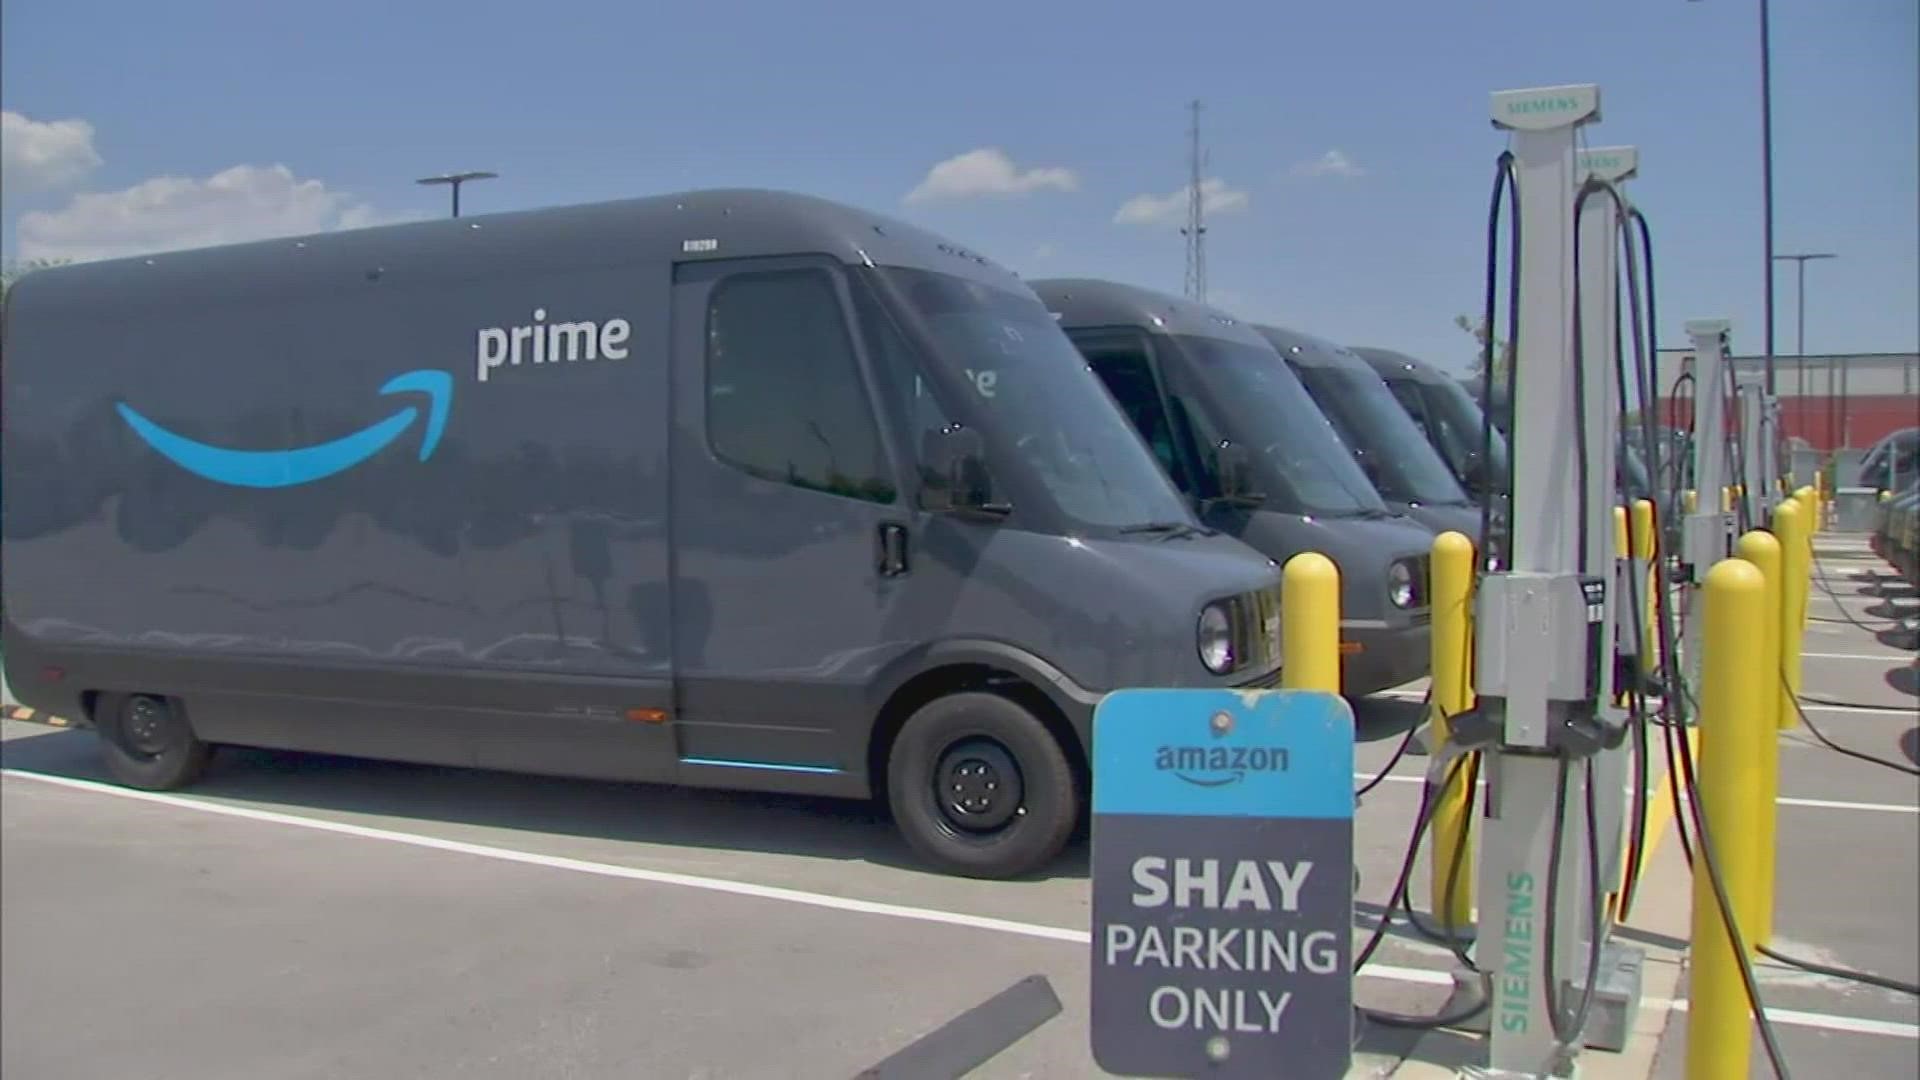 Thousands of custom electric delivery vehicles are rolling out to more than 100 cities, including Seattle, by the end of 2022 with plans to expand further.